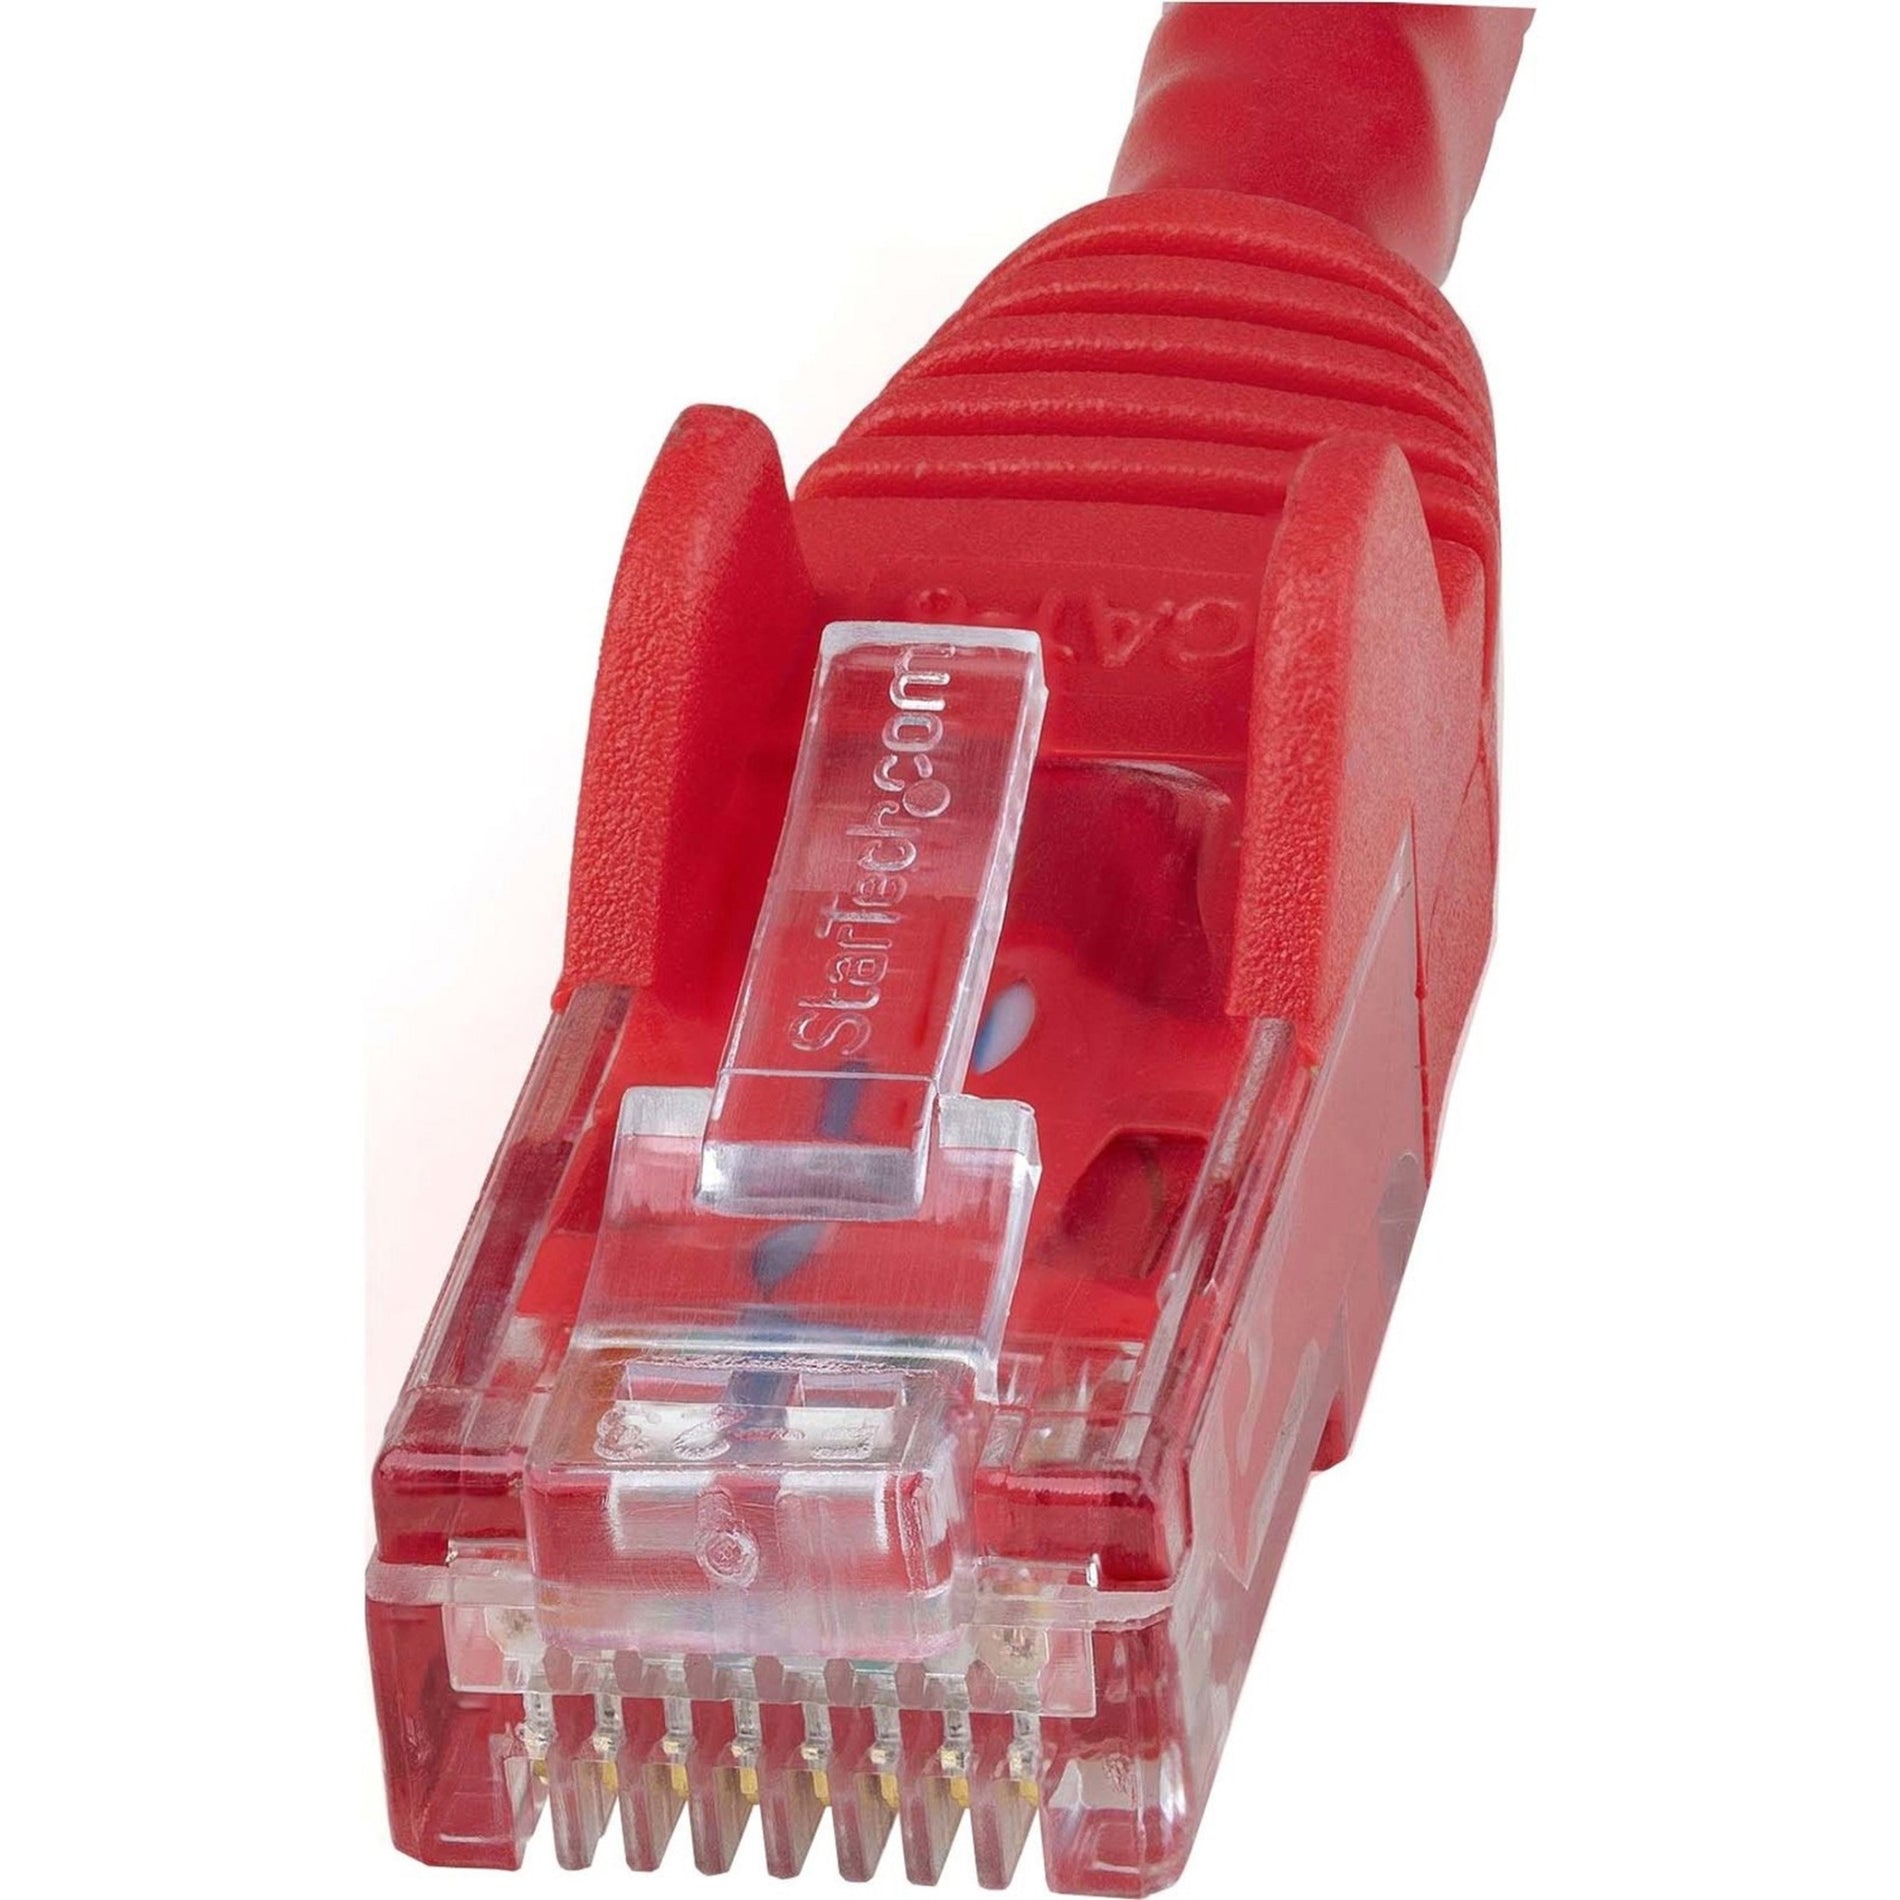 StarTech.com N6PATCH150RD Cat6 Patch Cable, 150ft Red Ethernet Cable, Snagless RJ45 Connectors